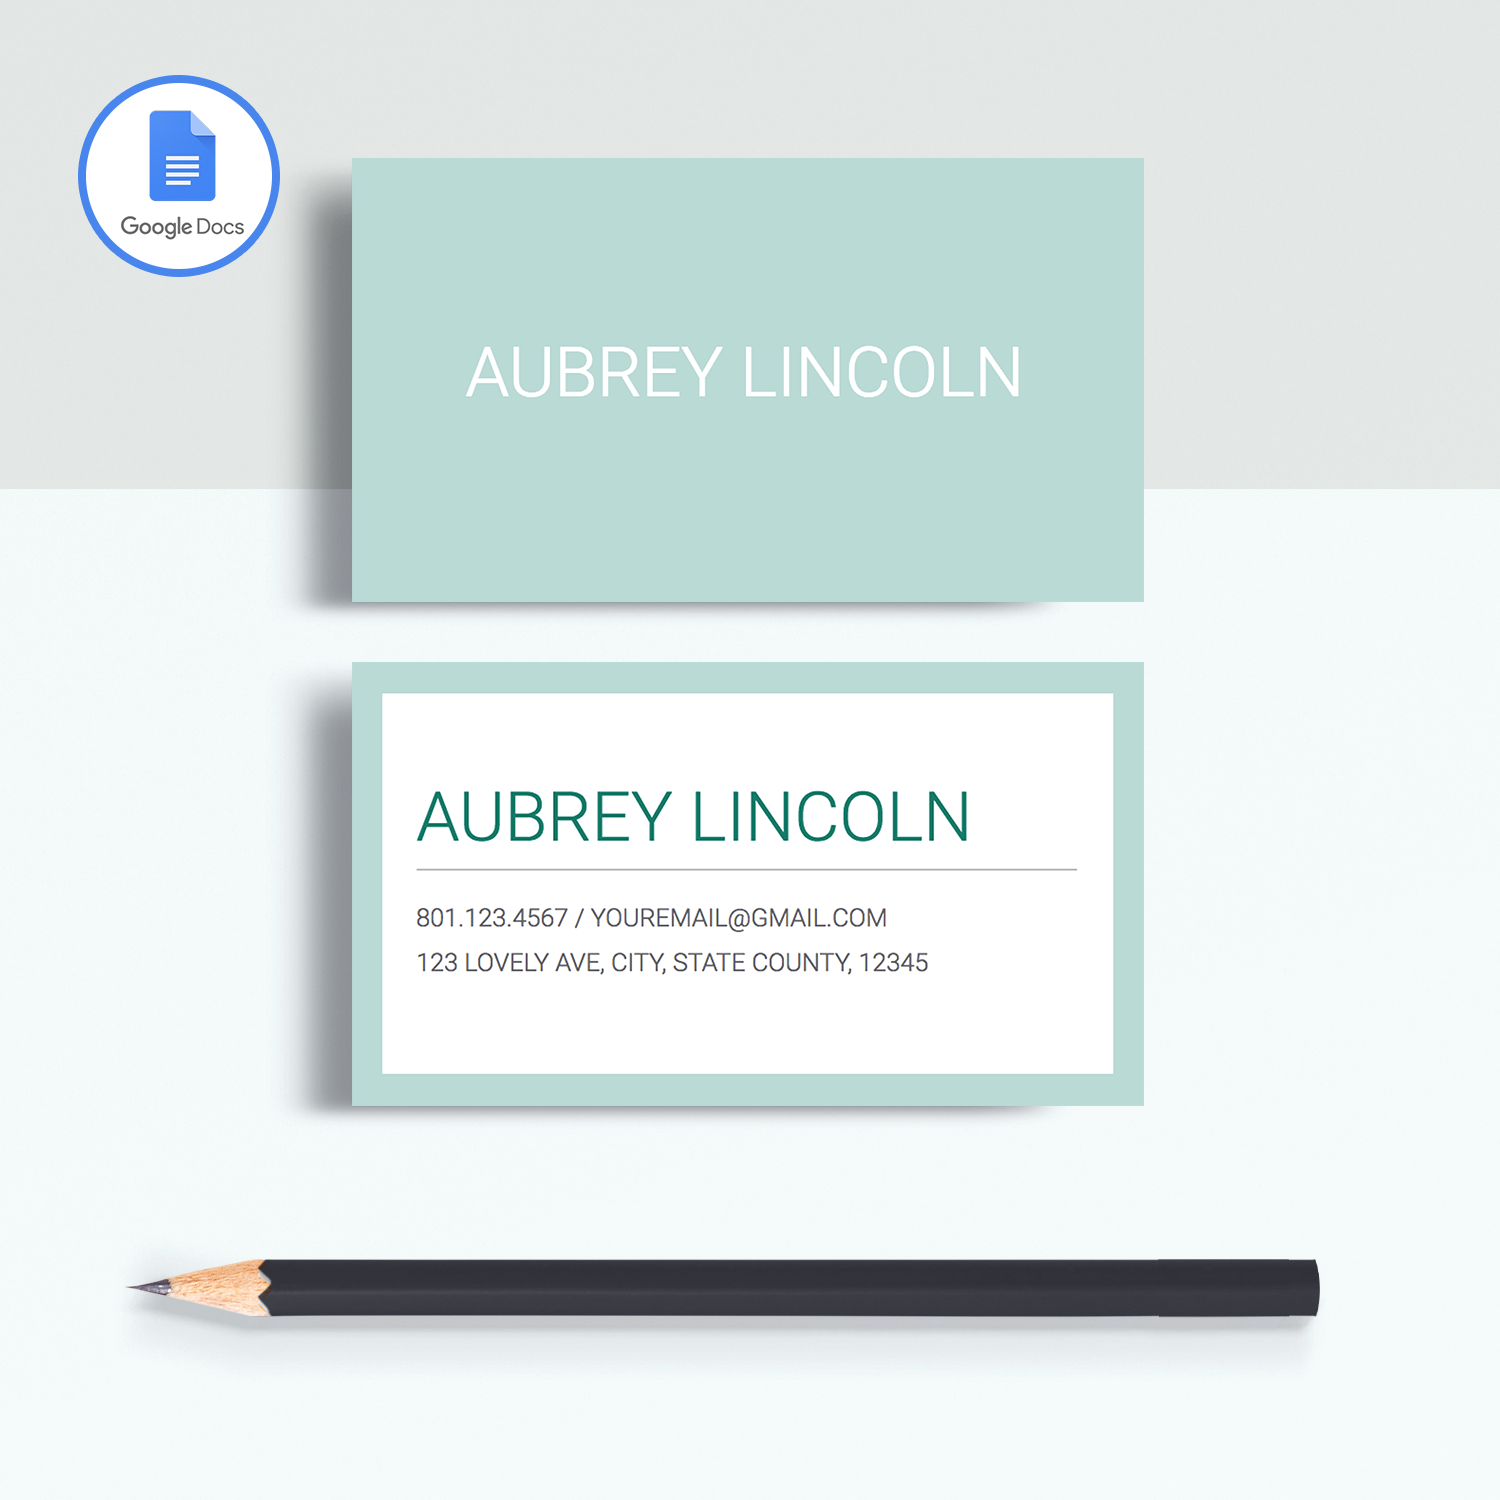 Professional Business Cards Template for Google Docs Aubrey Lincoln